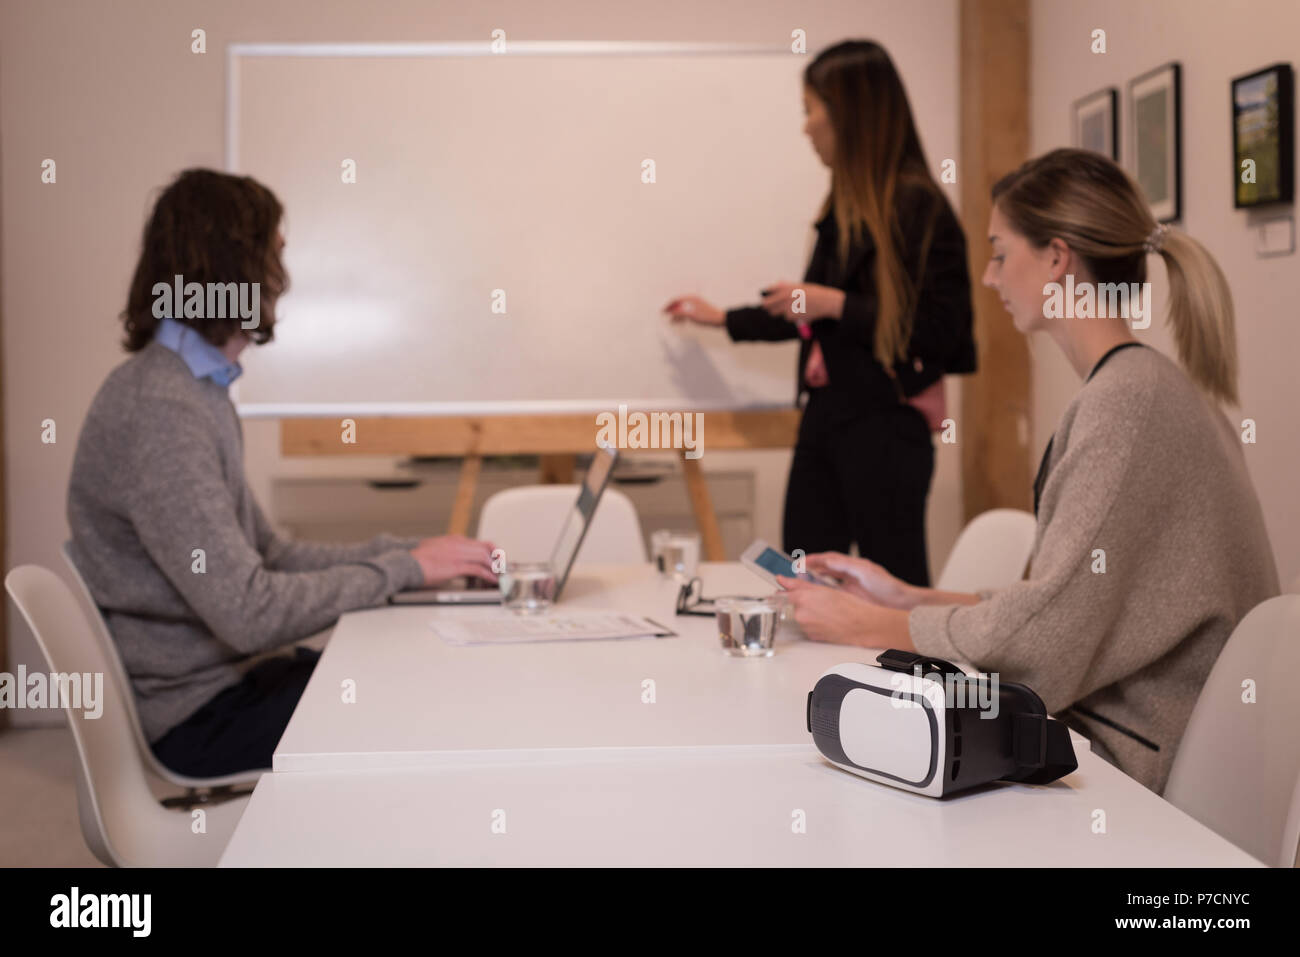 Business colleagues discussing over white board in conference room Stock Photo